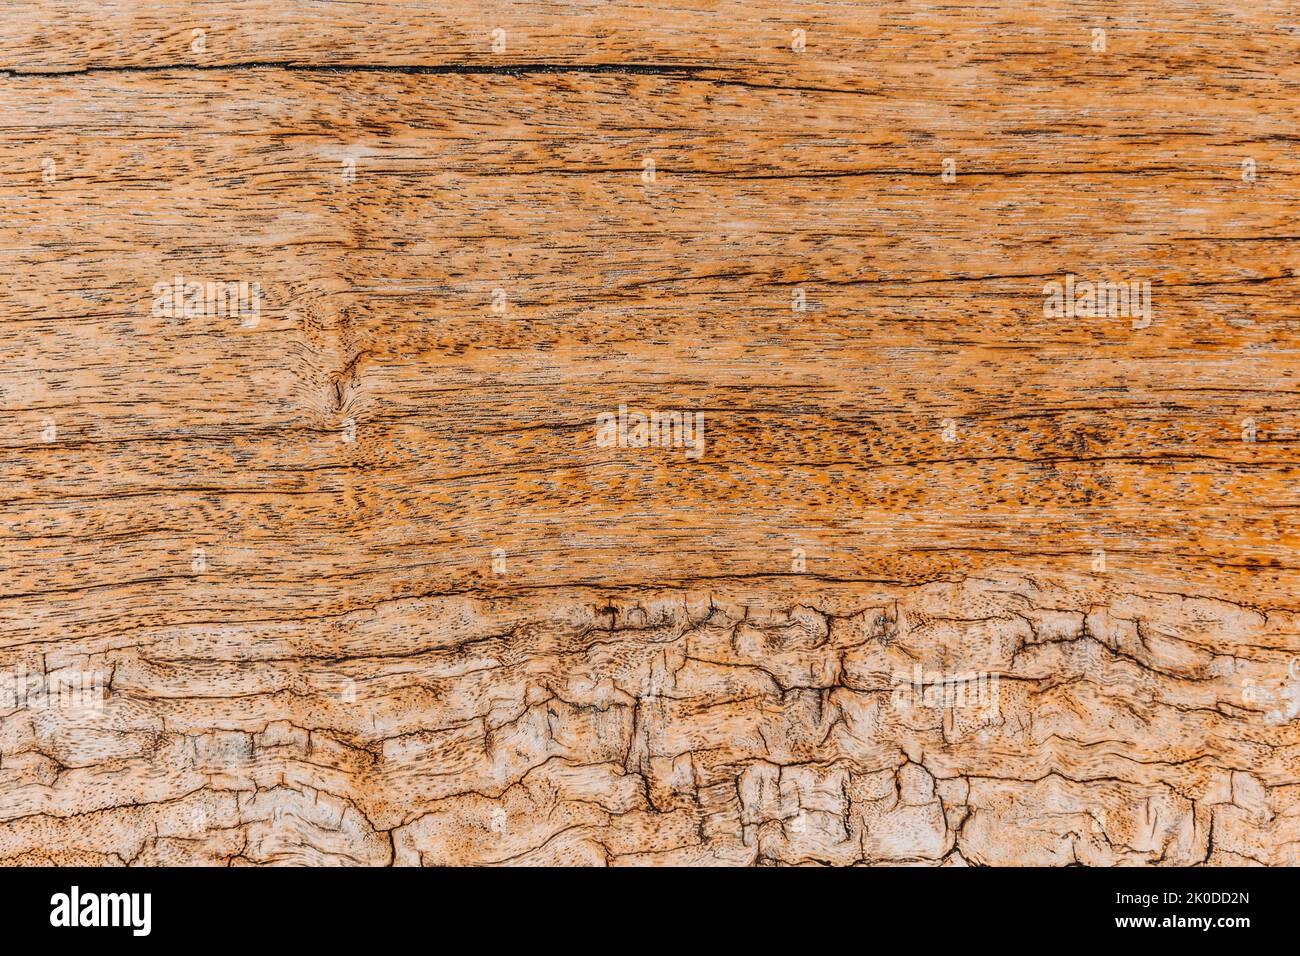 Close-up old cracked wooden surface, textured wooden background. The surface of the old brown wood texture. Stock Photo